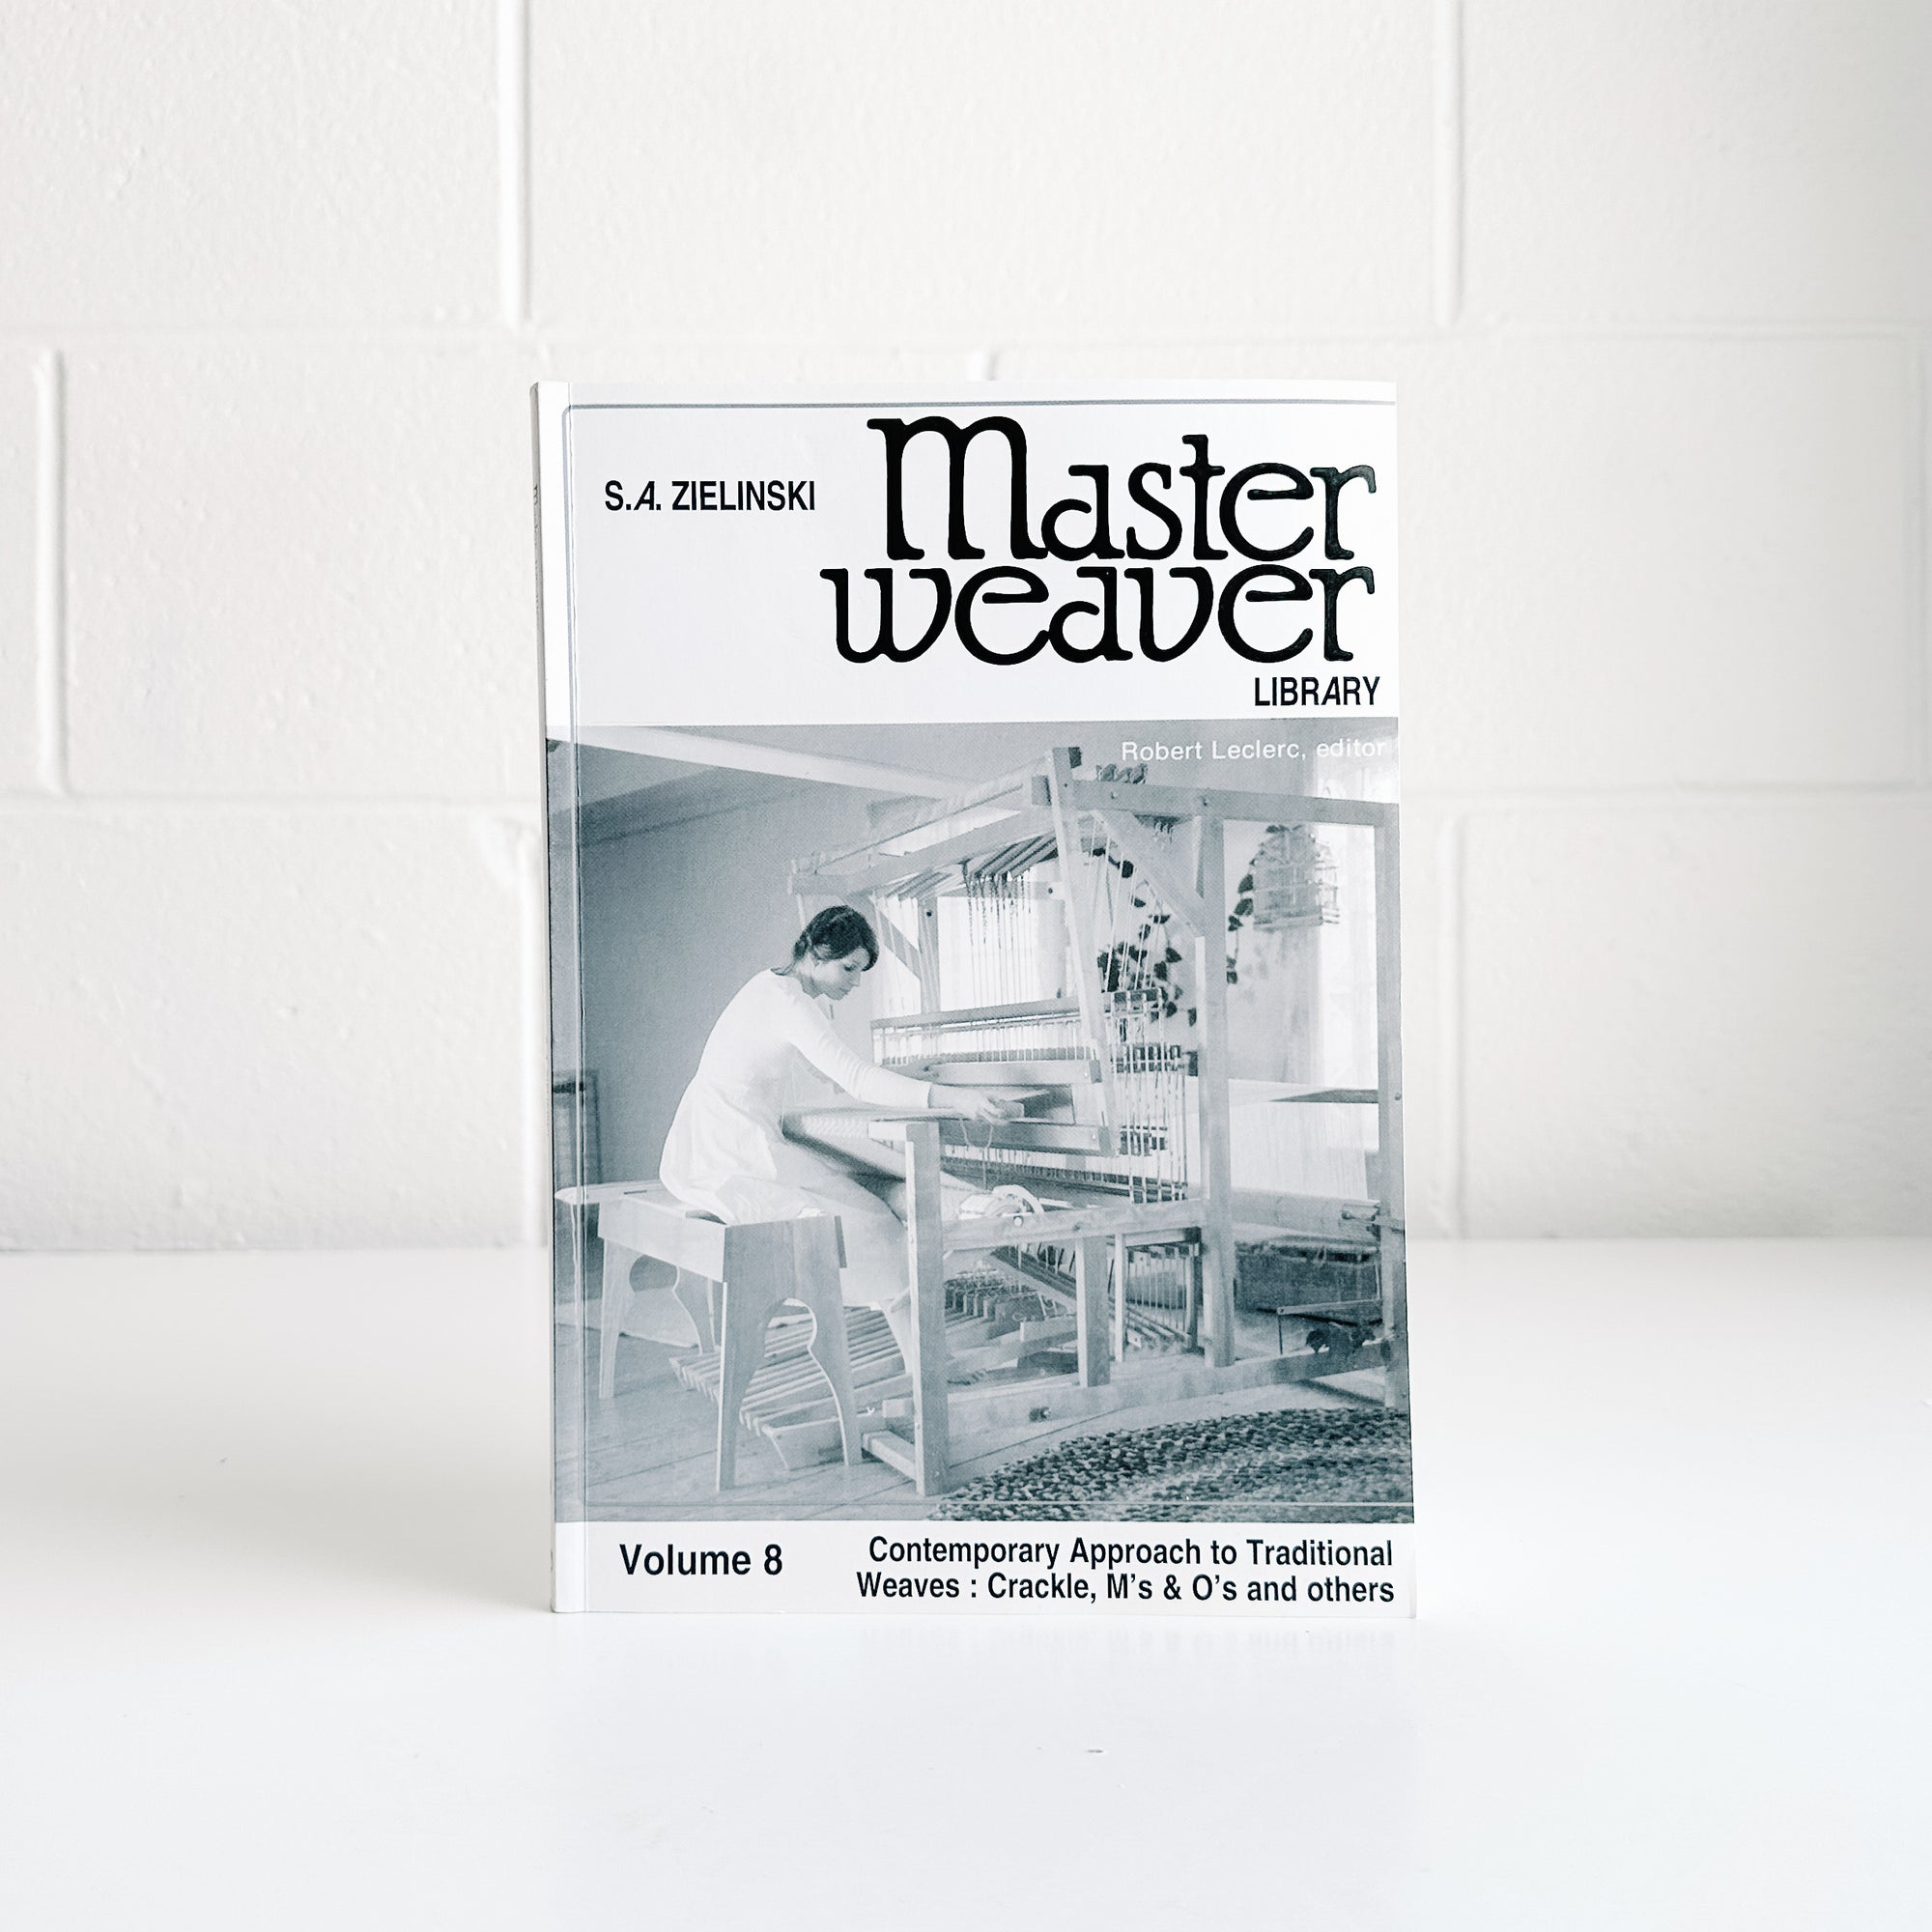 MASTER WEAVER LIBRARY by S. A . ZIELINSKI - Vol. 8 - Contemporary Approach to Traditional Weaves: Crackle,M's & O's and Others